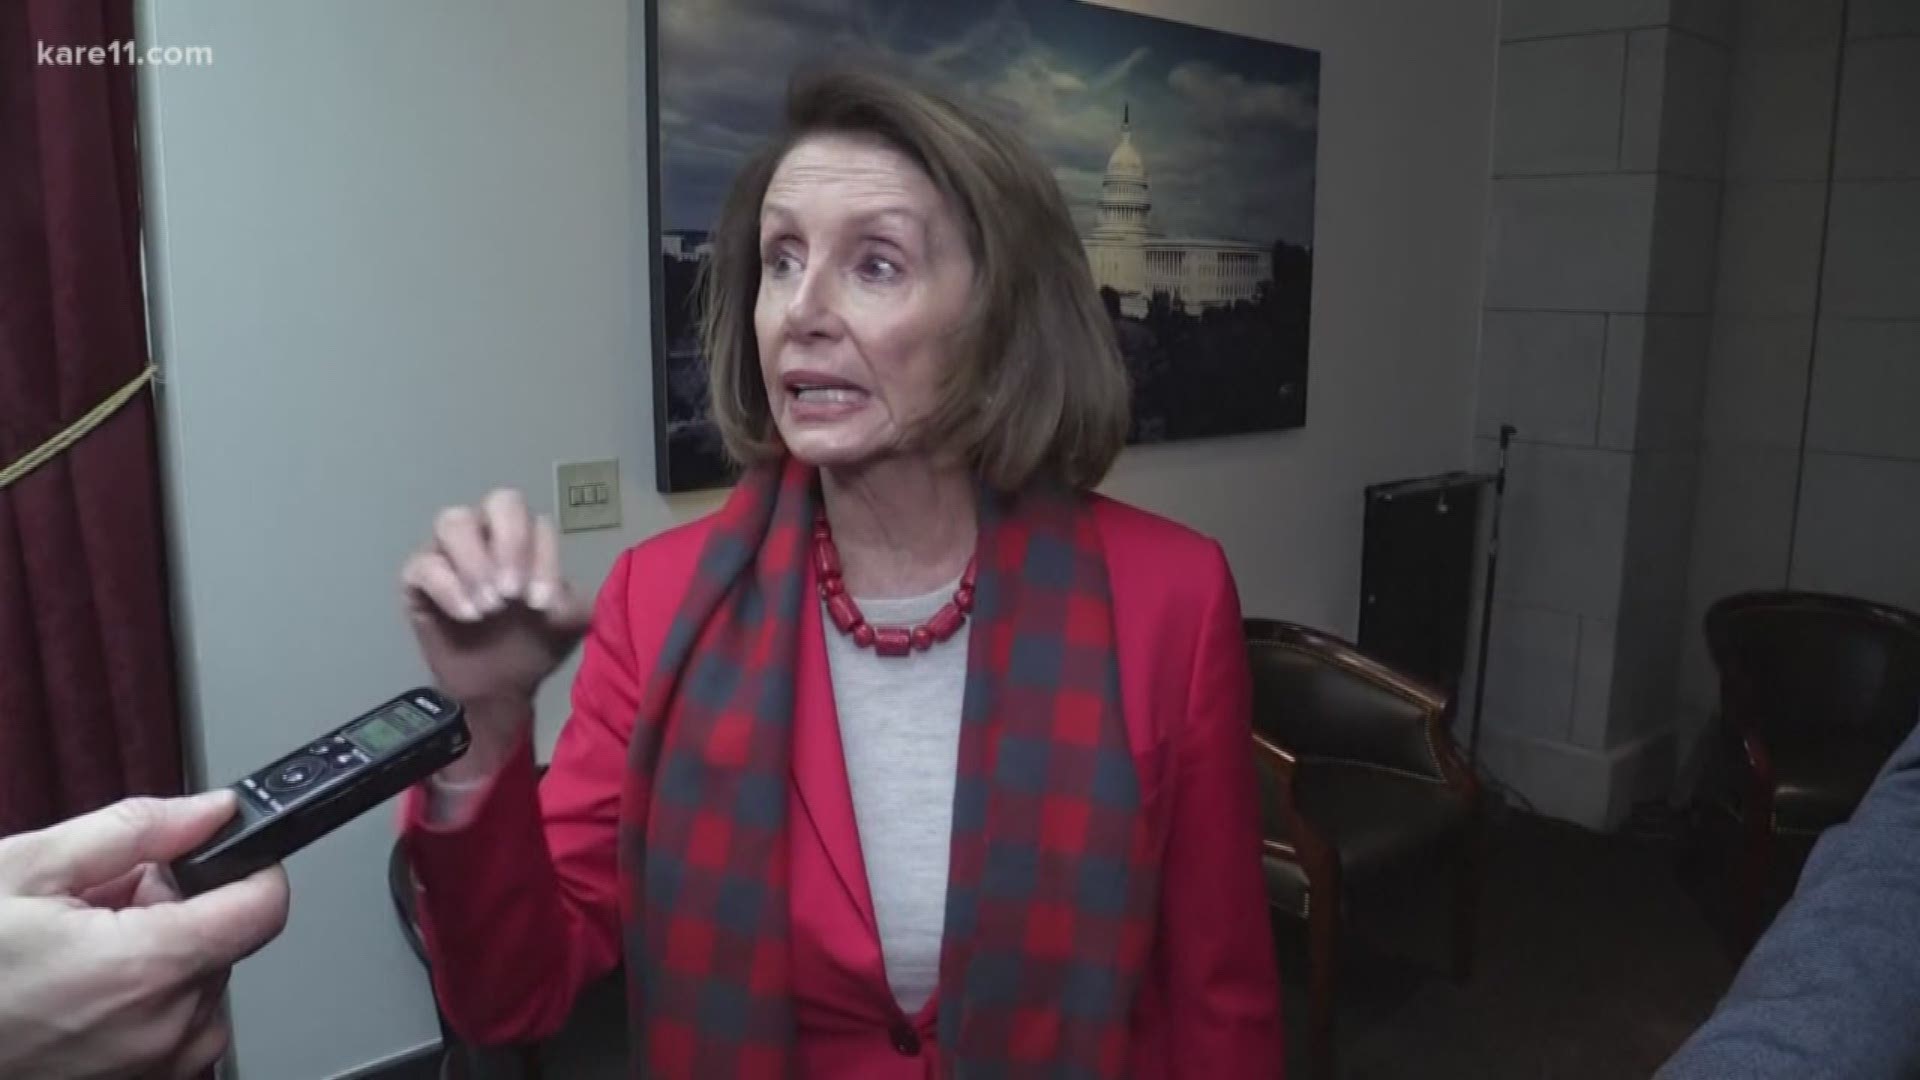 Speaker of the House Nancy Pelosi asked President Donald Trump on Wednesday to delay his State of the Union address until after the government shutdown ends. https://kare11.tv/2TVh9eM